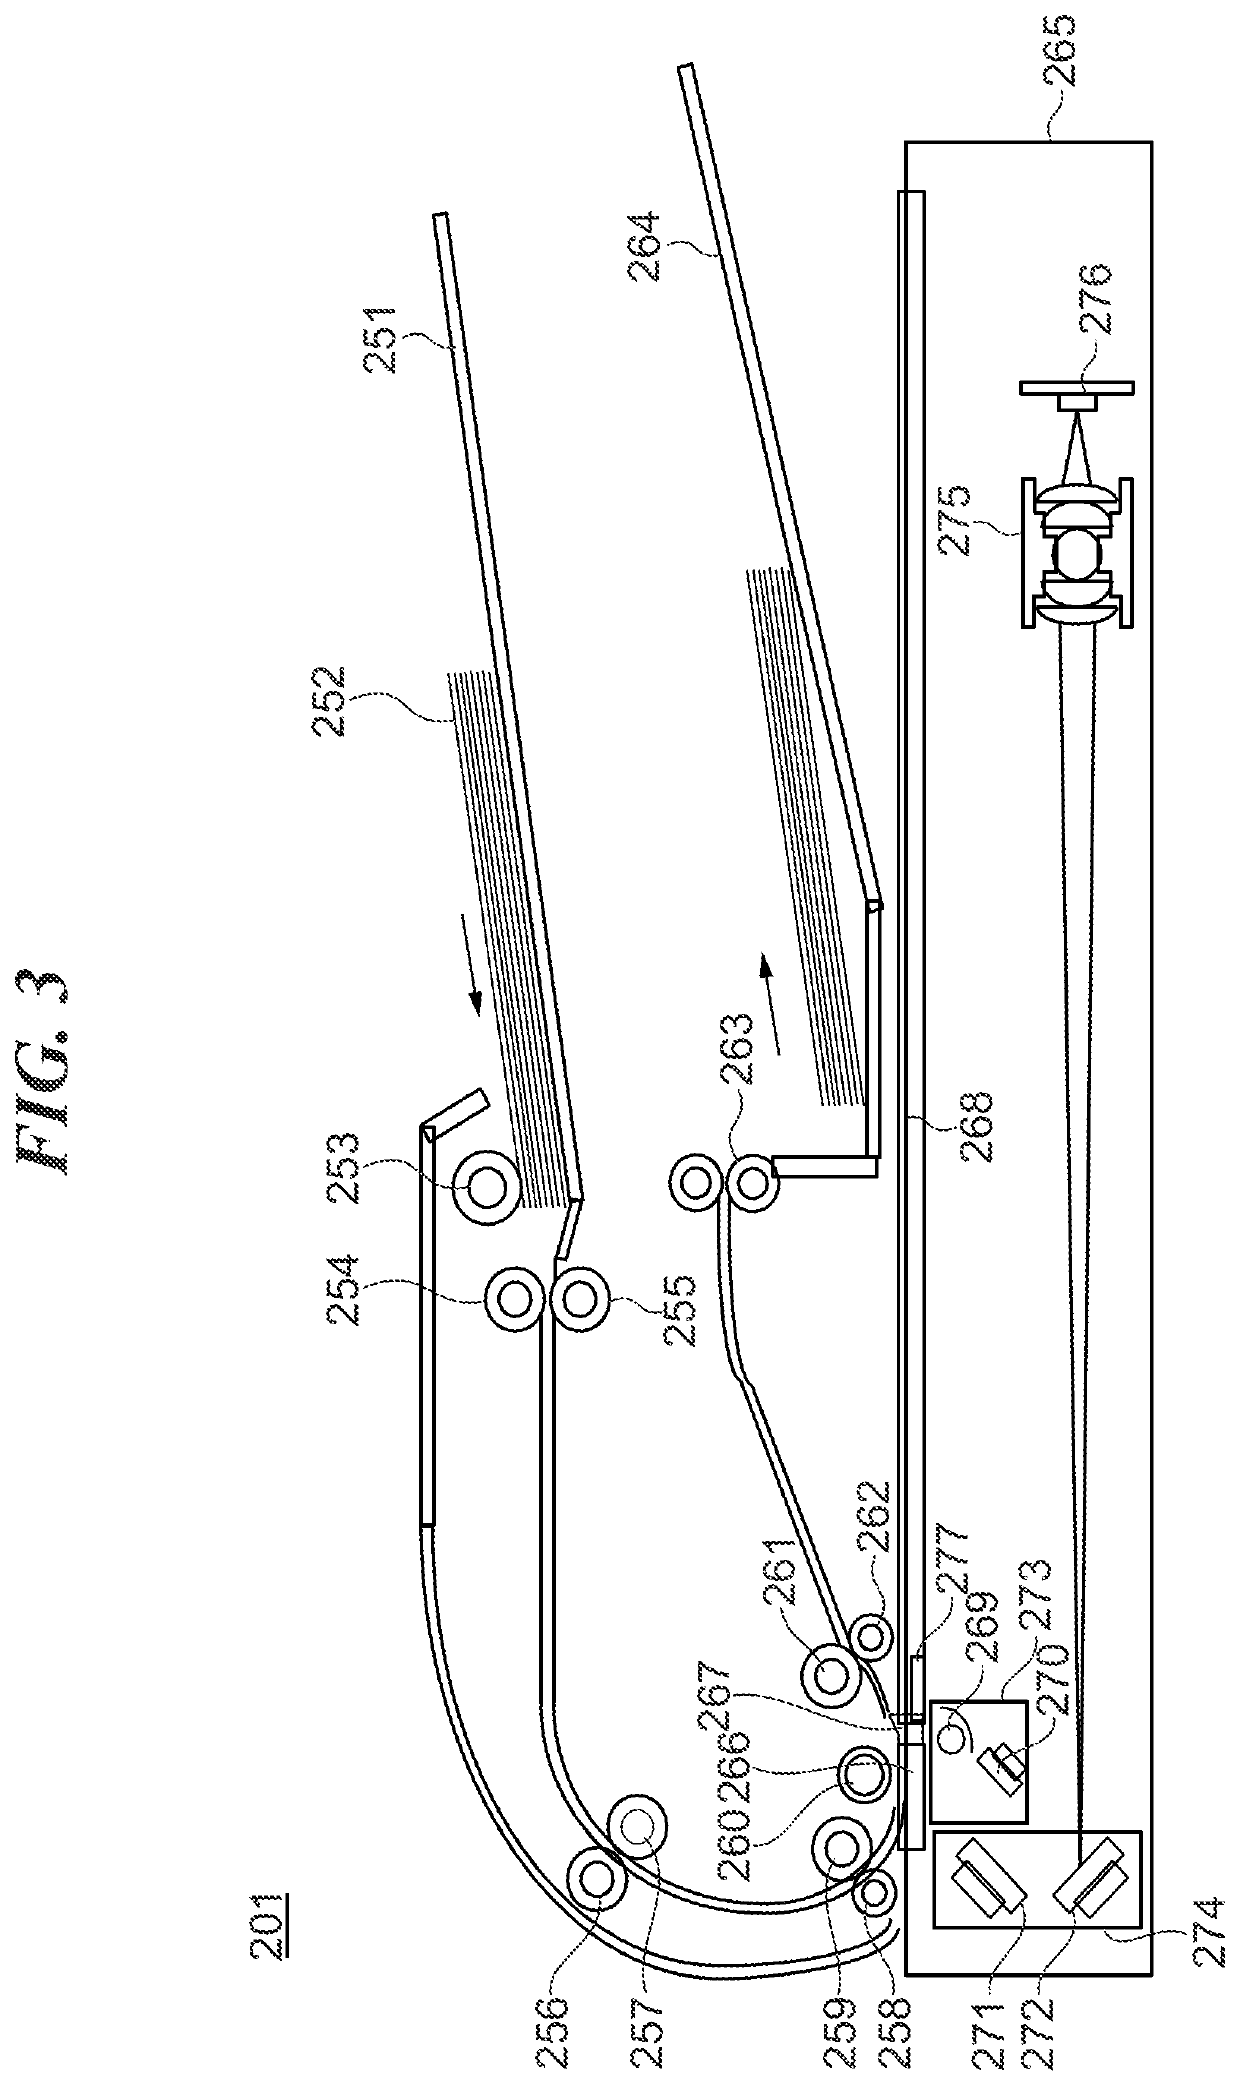 Image forming system that suitably carries out communication using mobile communication system, control method therefor, and storage medium